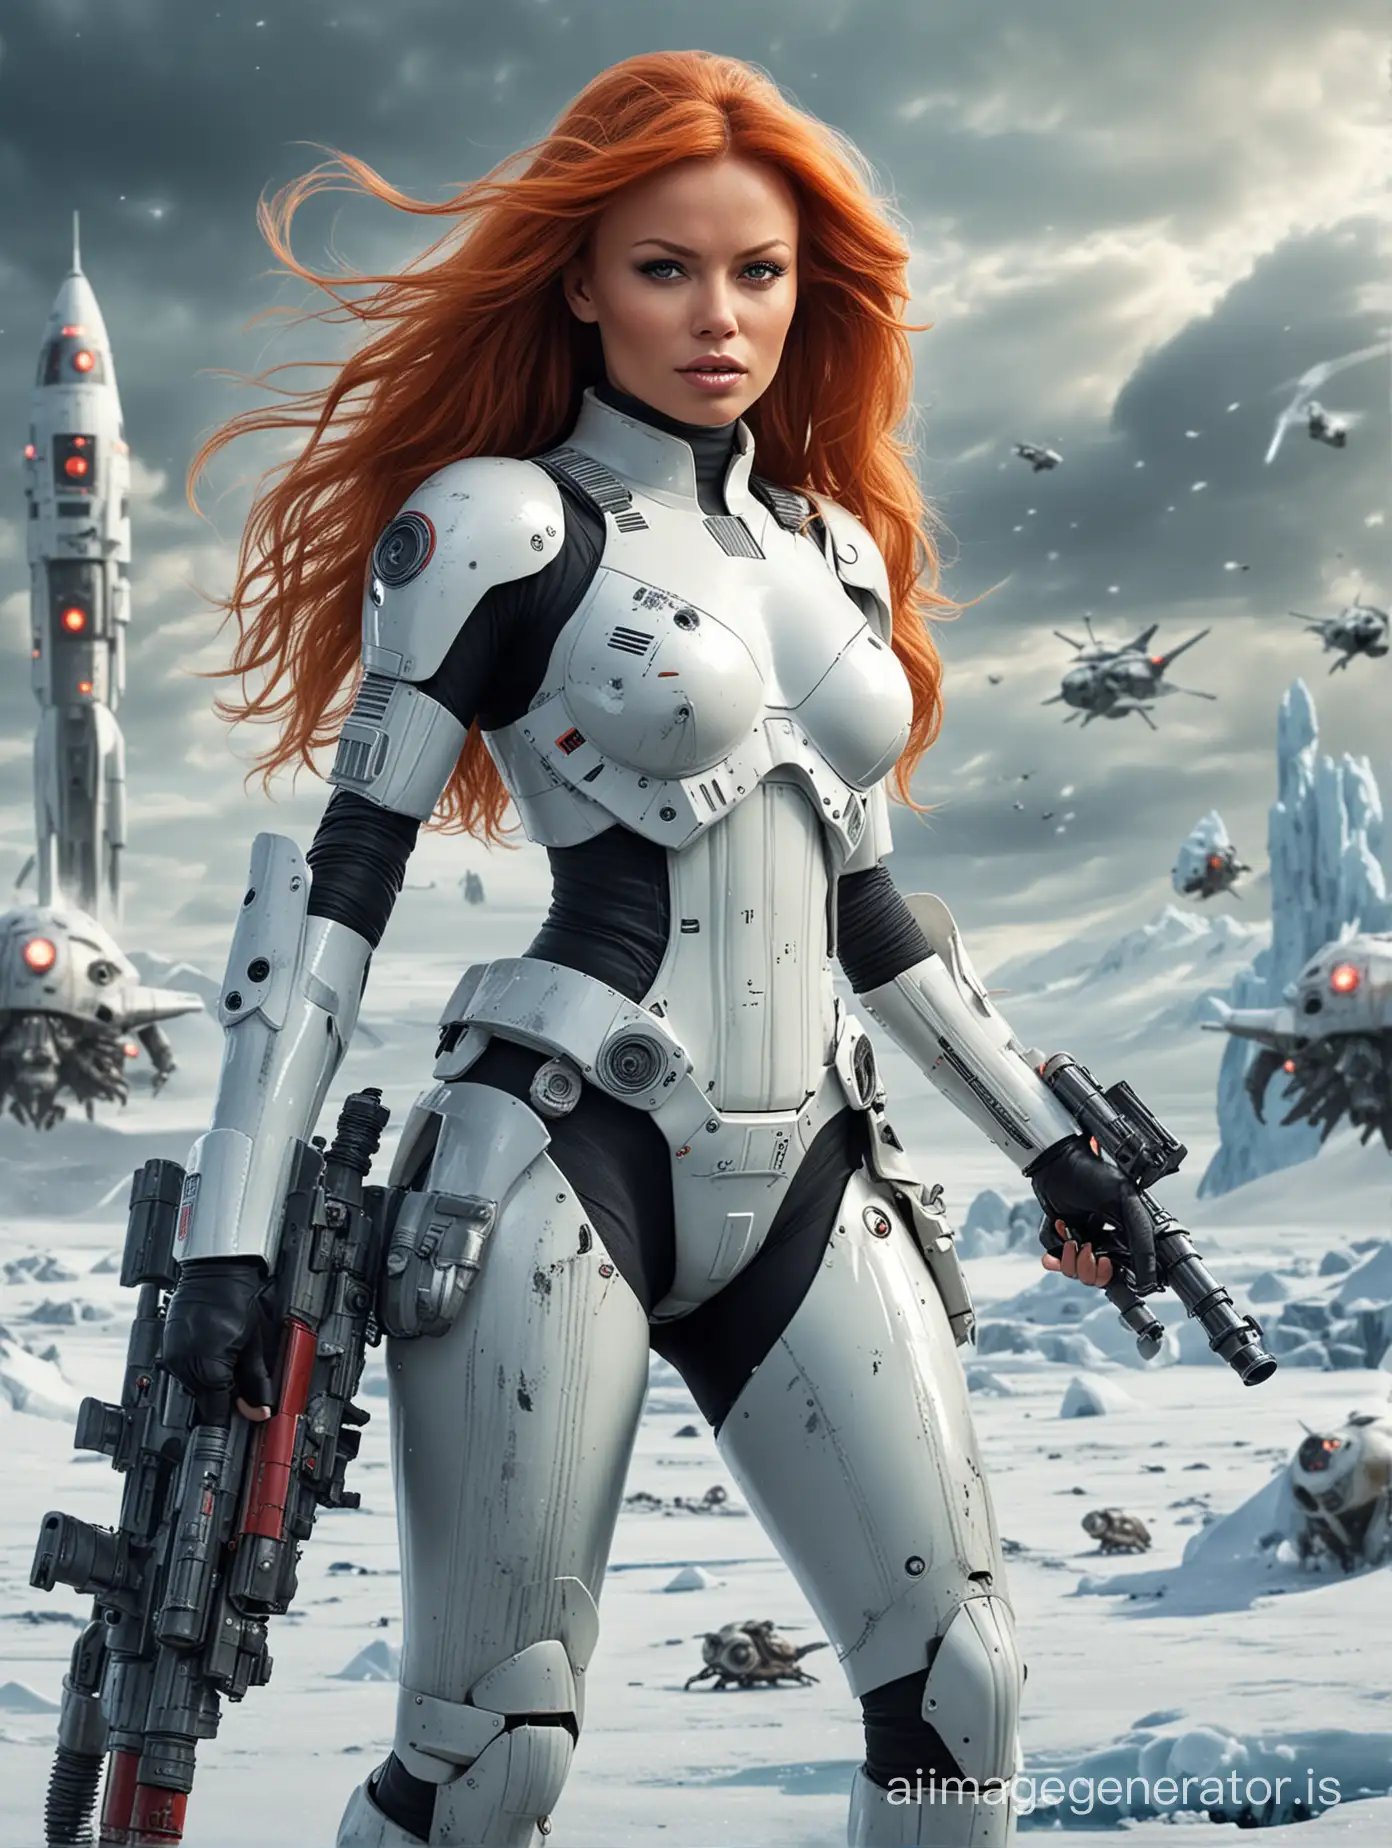 Pamela-Anderson-Riding-Rocket-Pulled-by-Snails-in-Stormtrooper-Armor-Epic-Arctic-Space-Battle-Scene